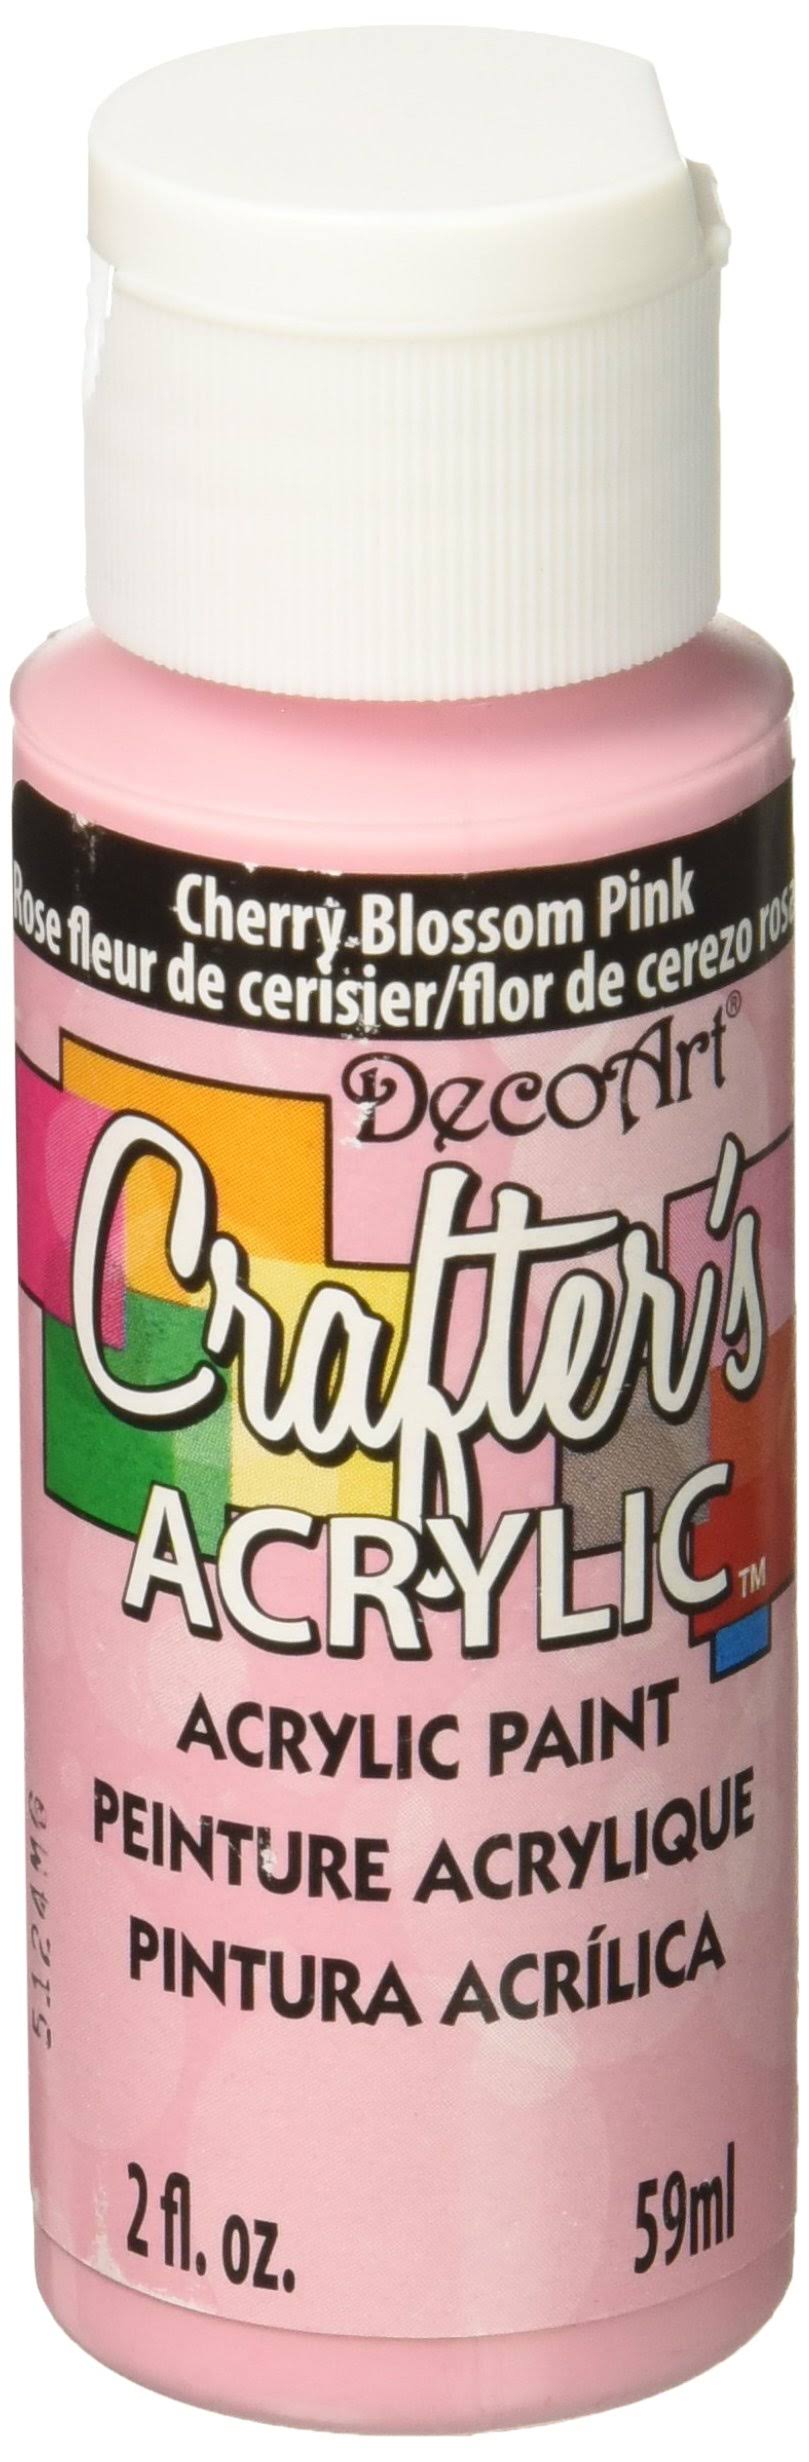 DecoArt Crafters Acrylic Paint - Cherry Blossom Pink Artists, 59ml